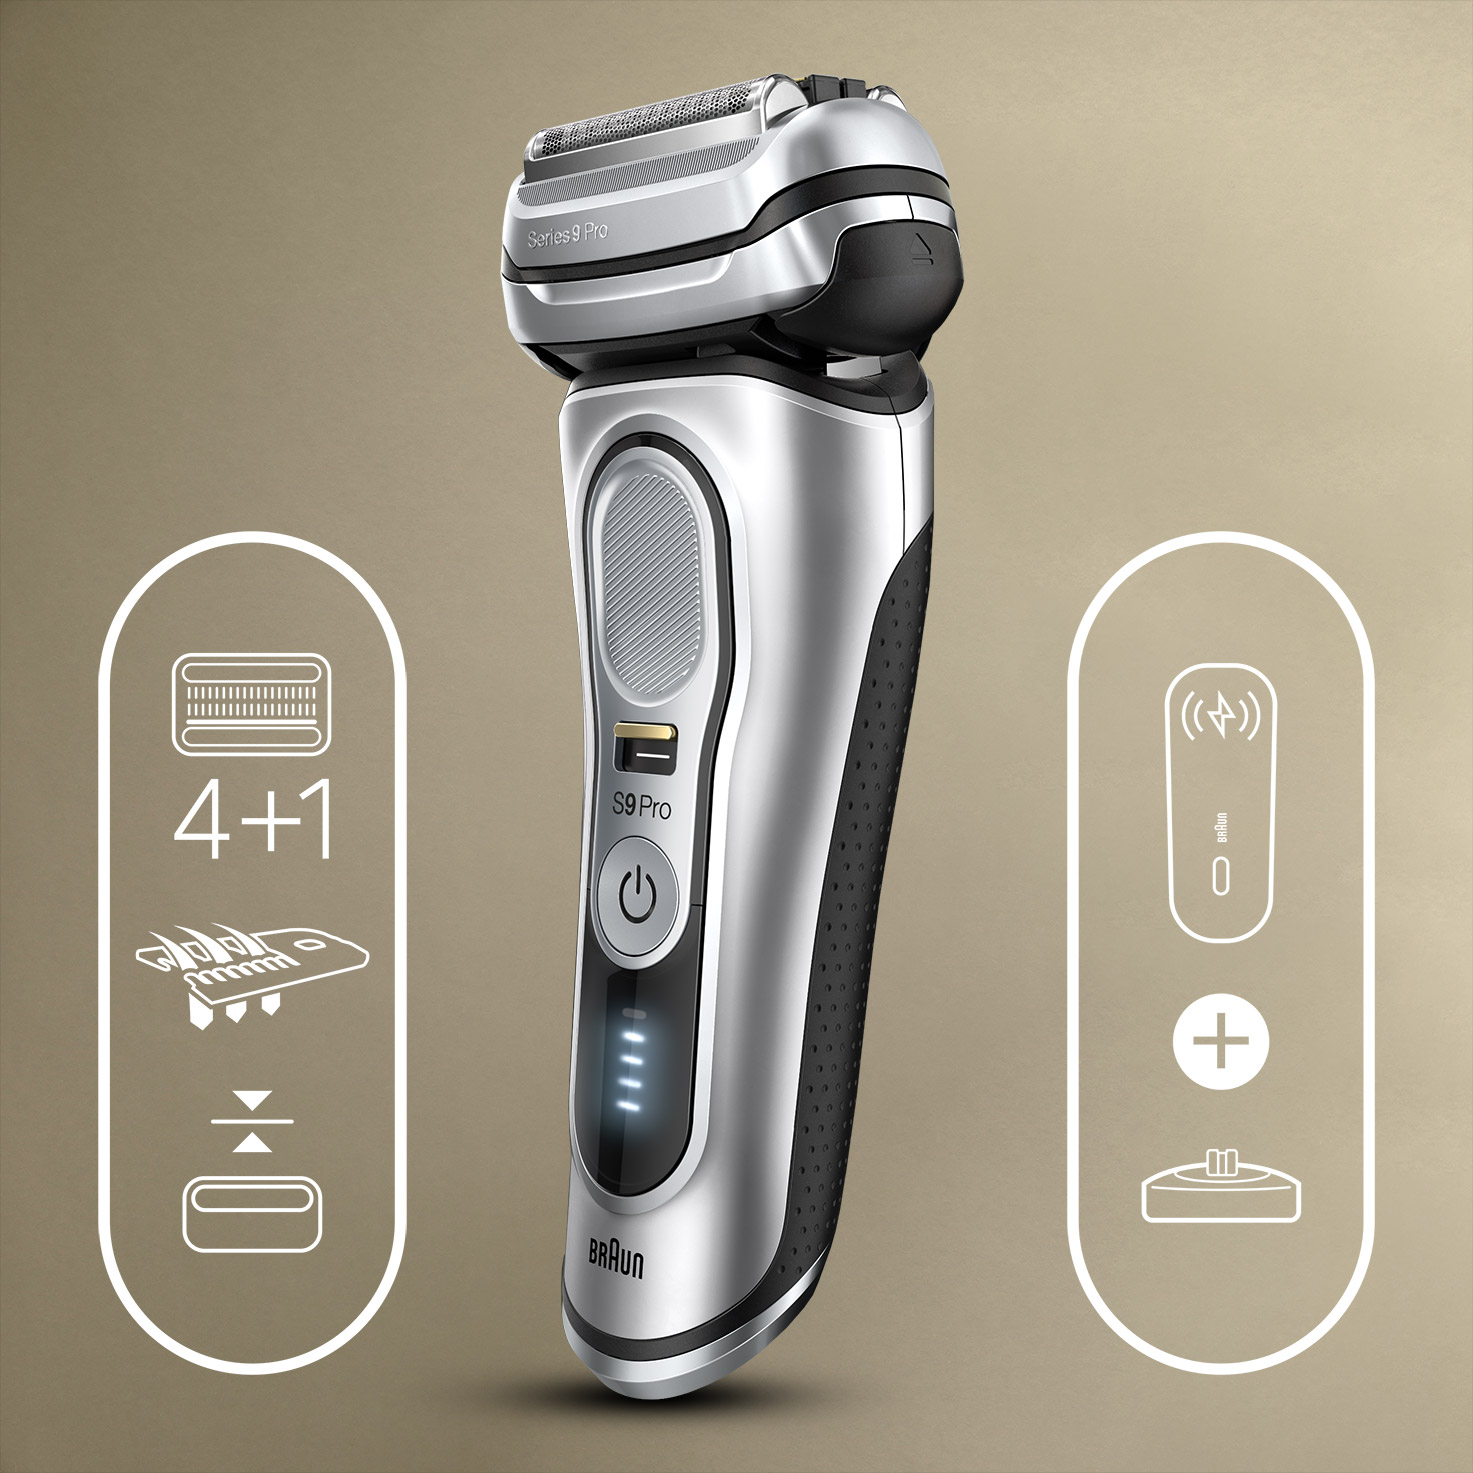 Series 9 Pro 9427s Wet & Dry shaver with PowerCase and charging 